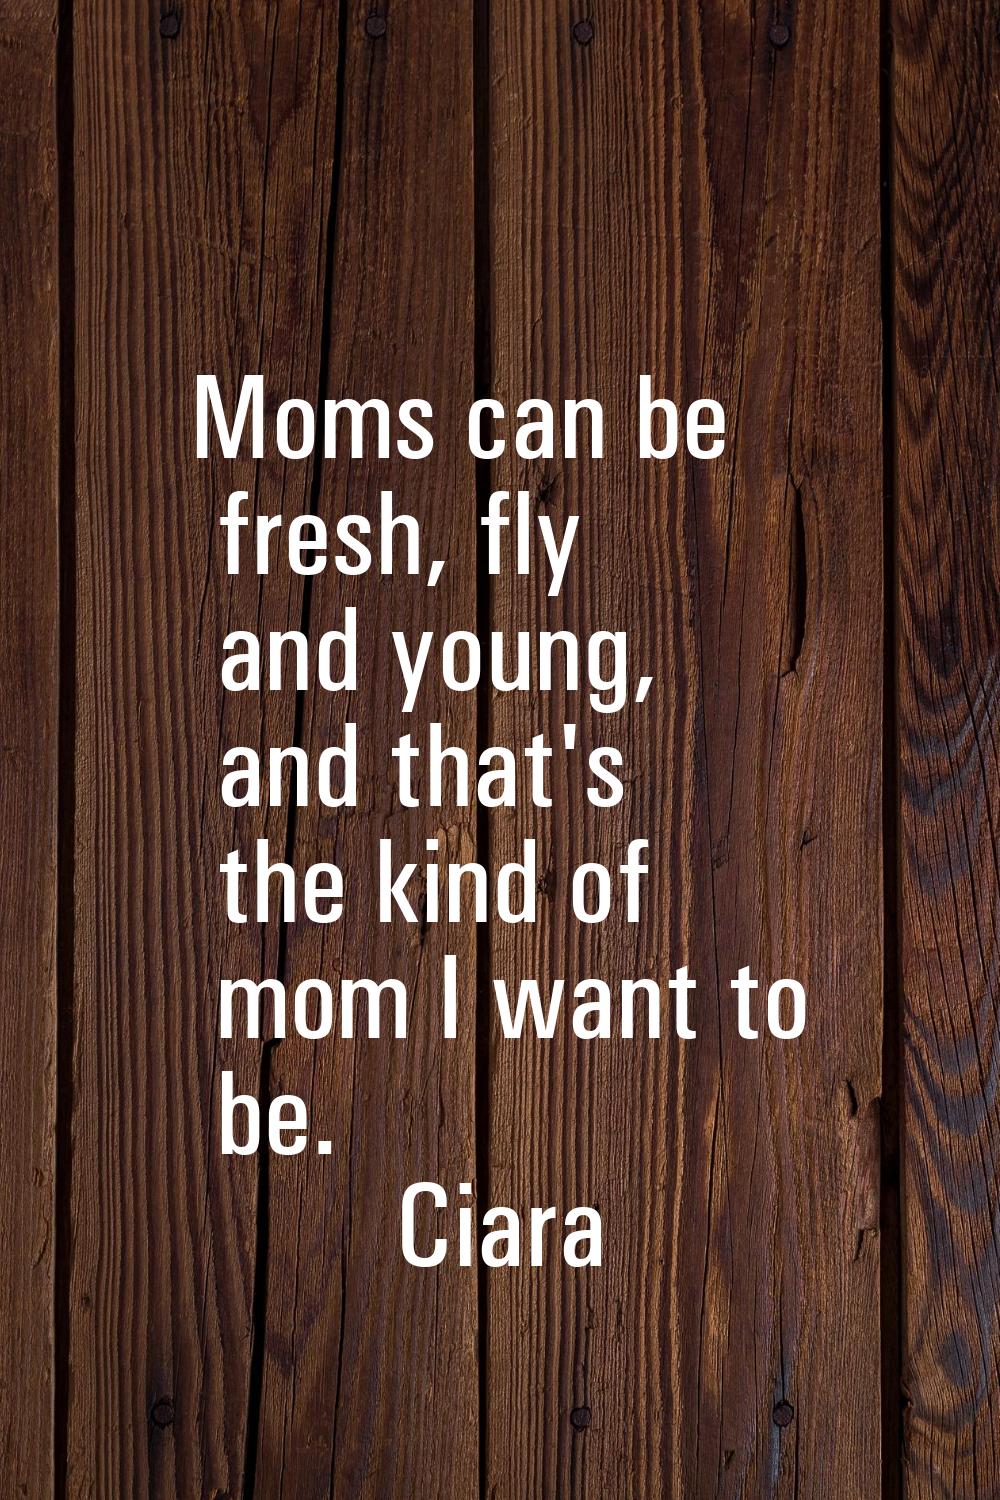 Moms can be fresh, fly and young, and that's the kind of mom I want to be.